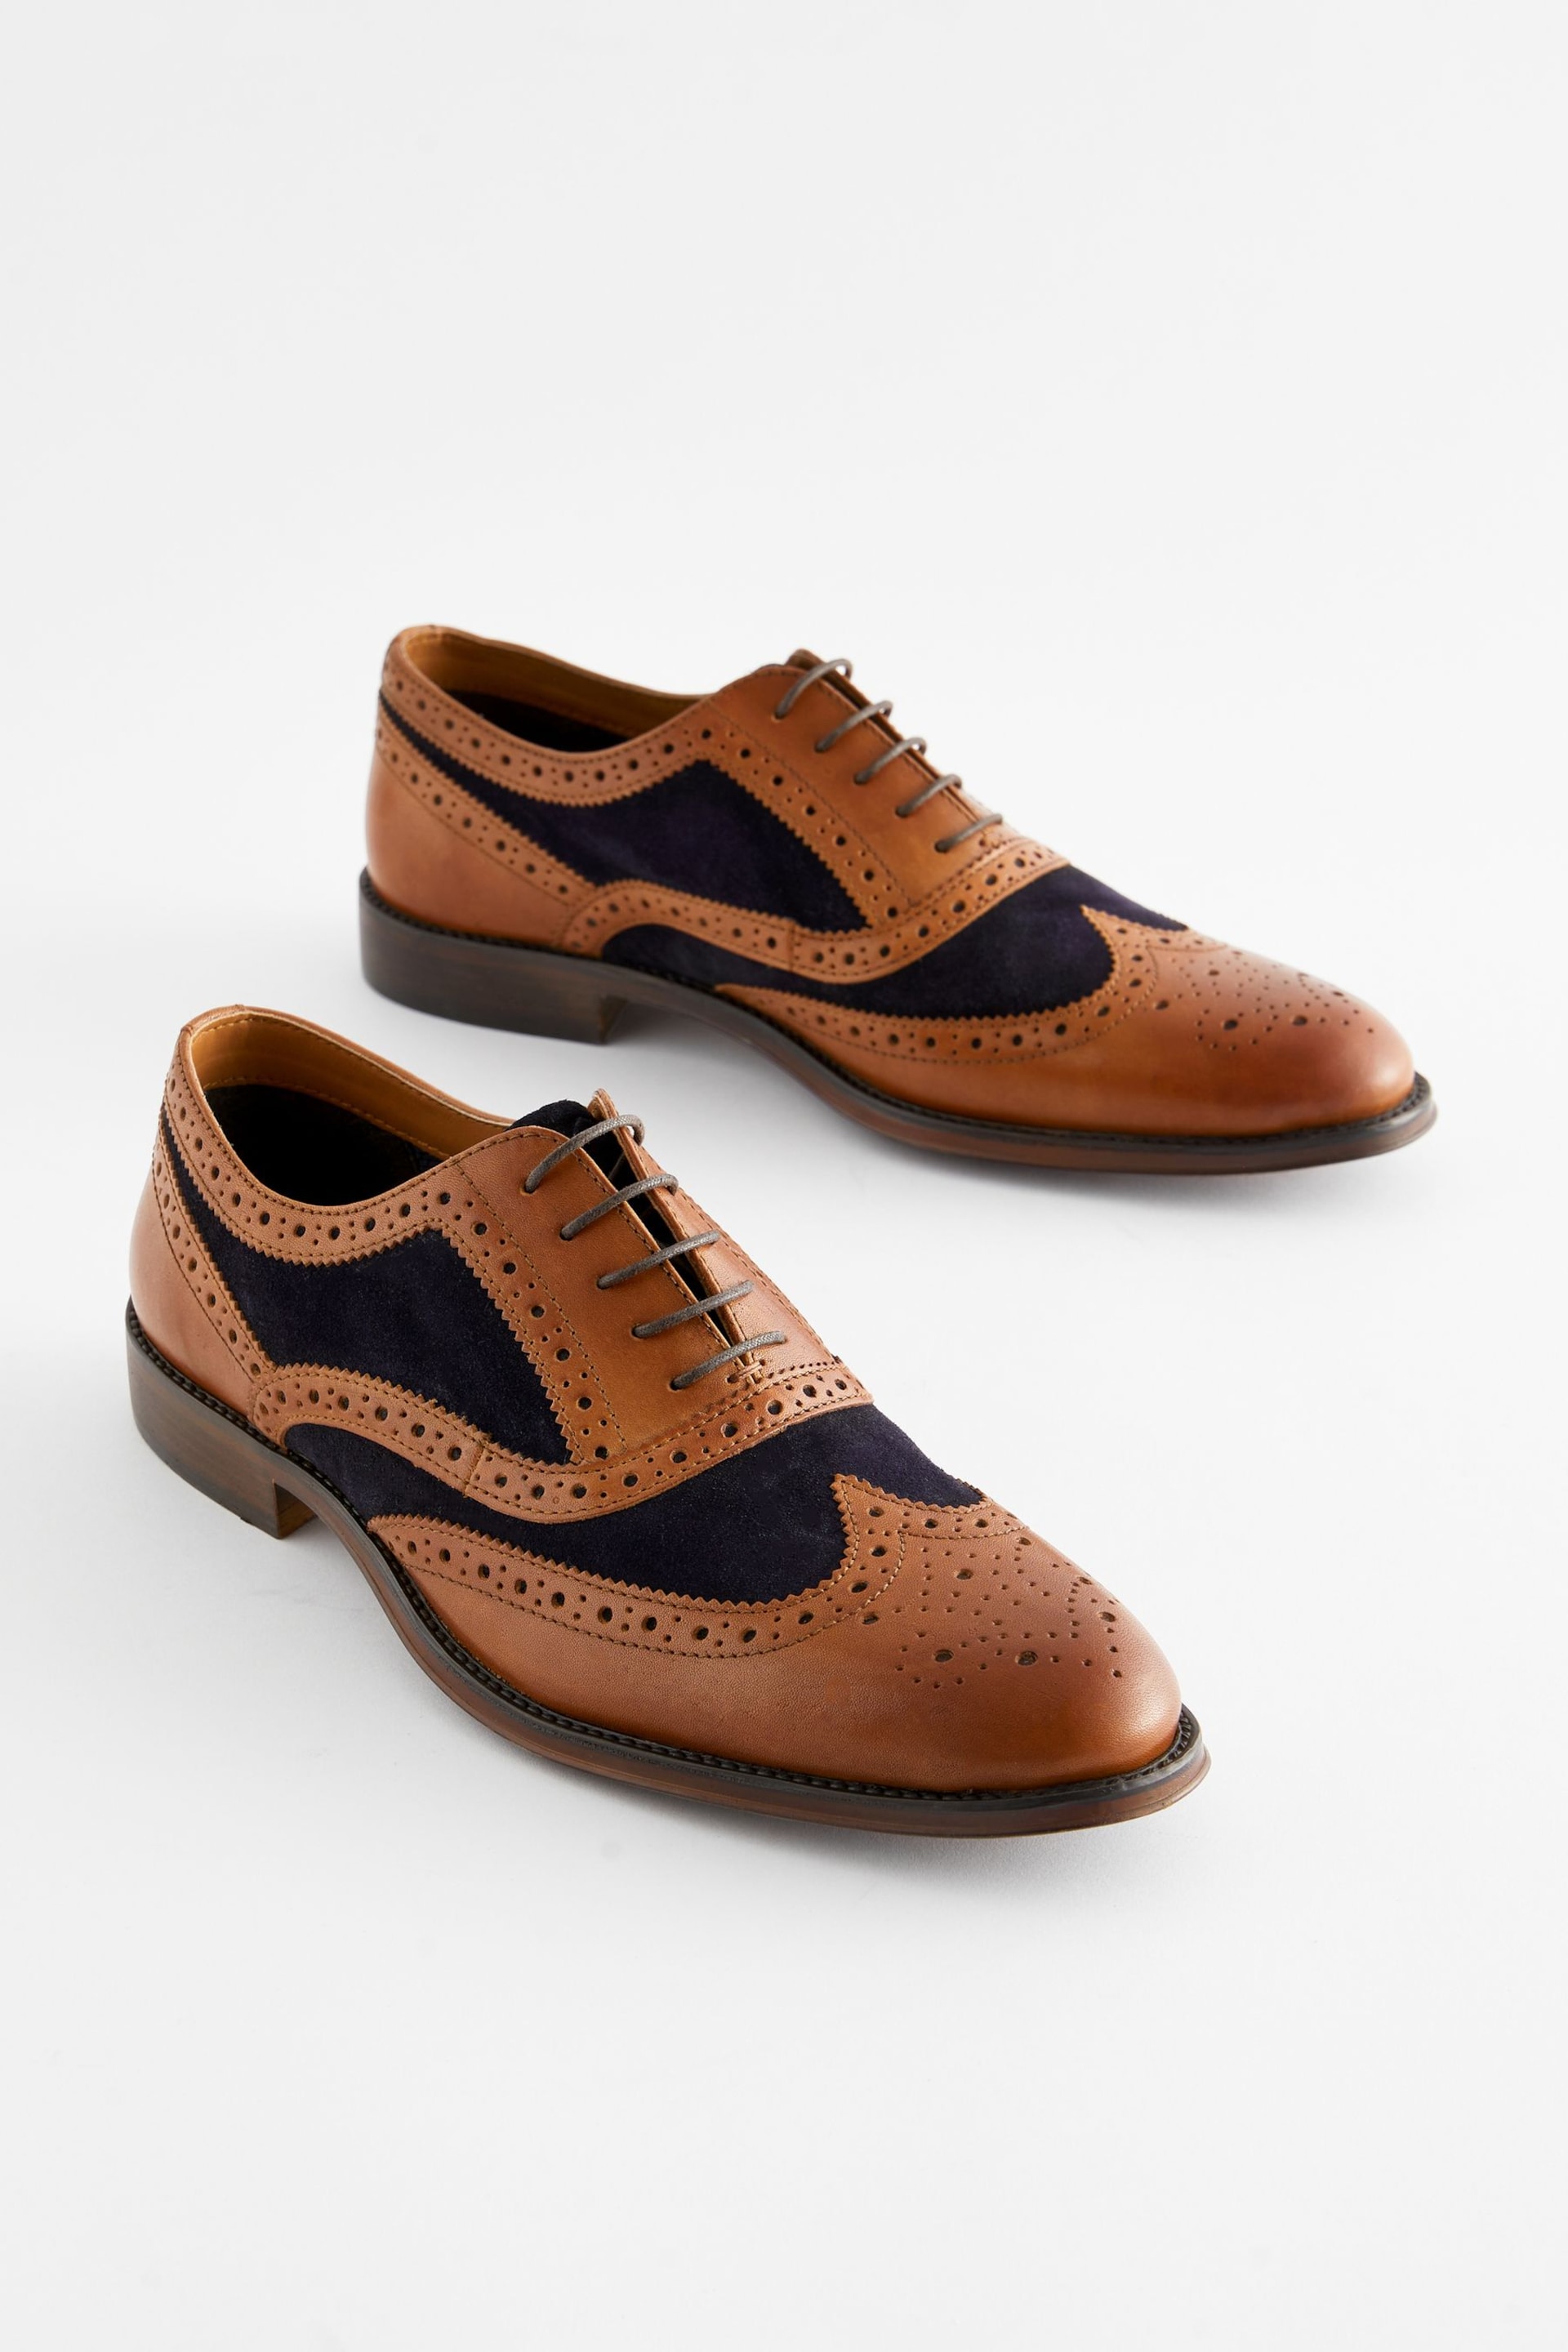 Tan/Navy Leather Contrast Panel Brogue Shoes - Image 1 of 6